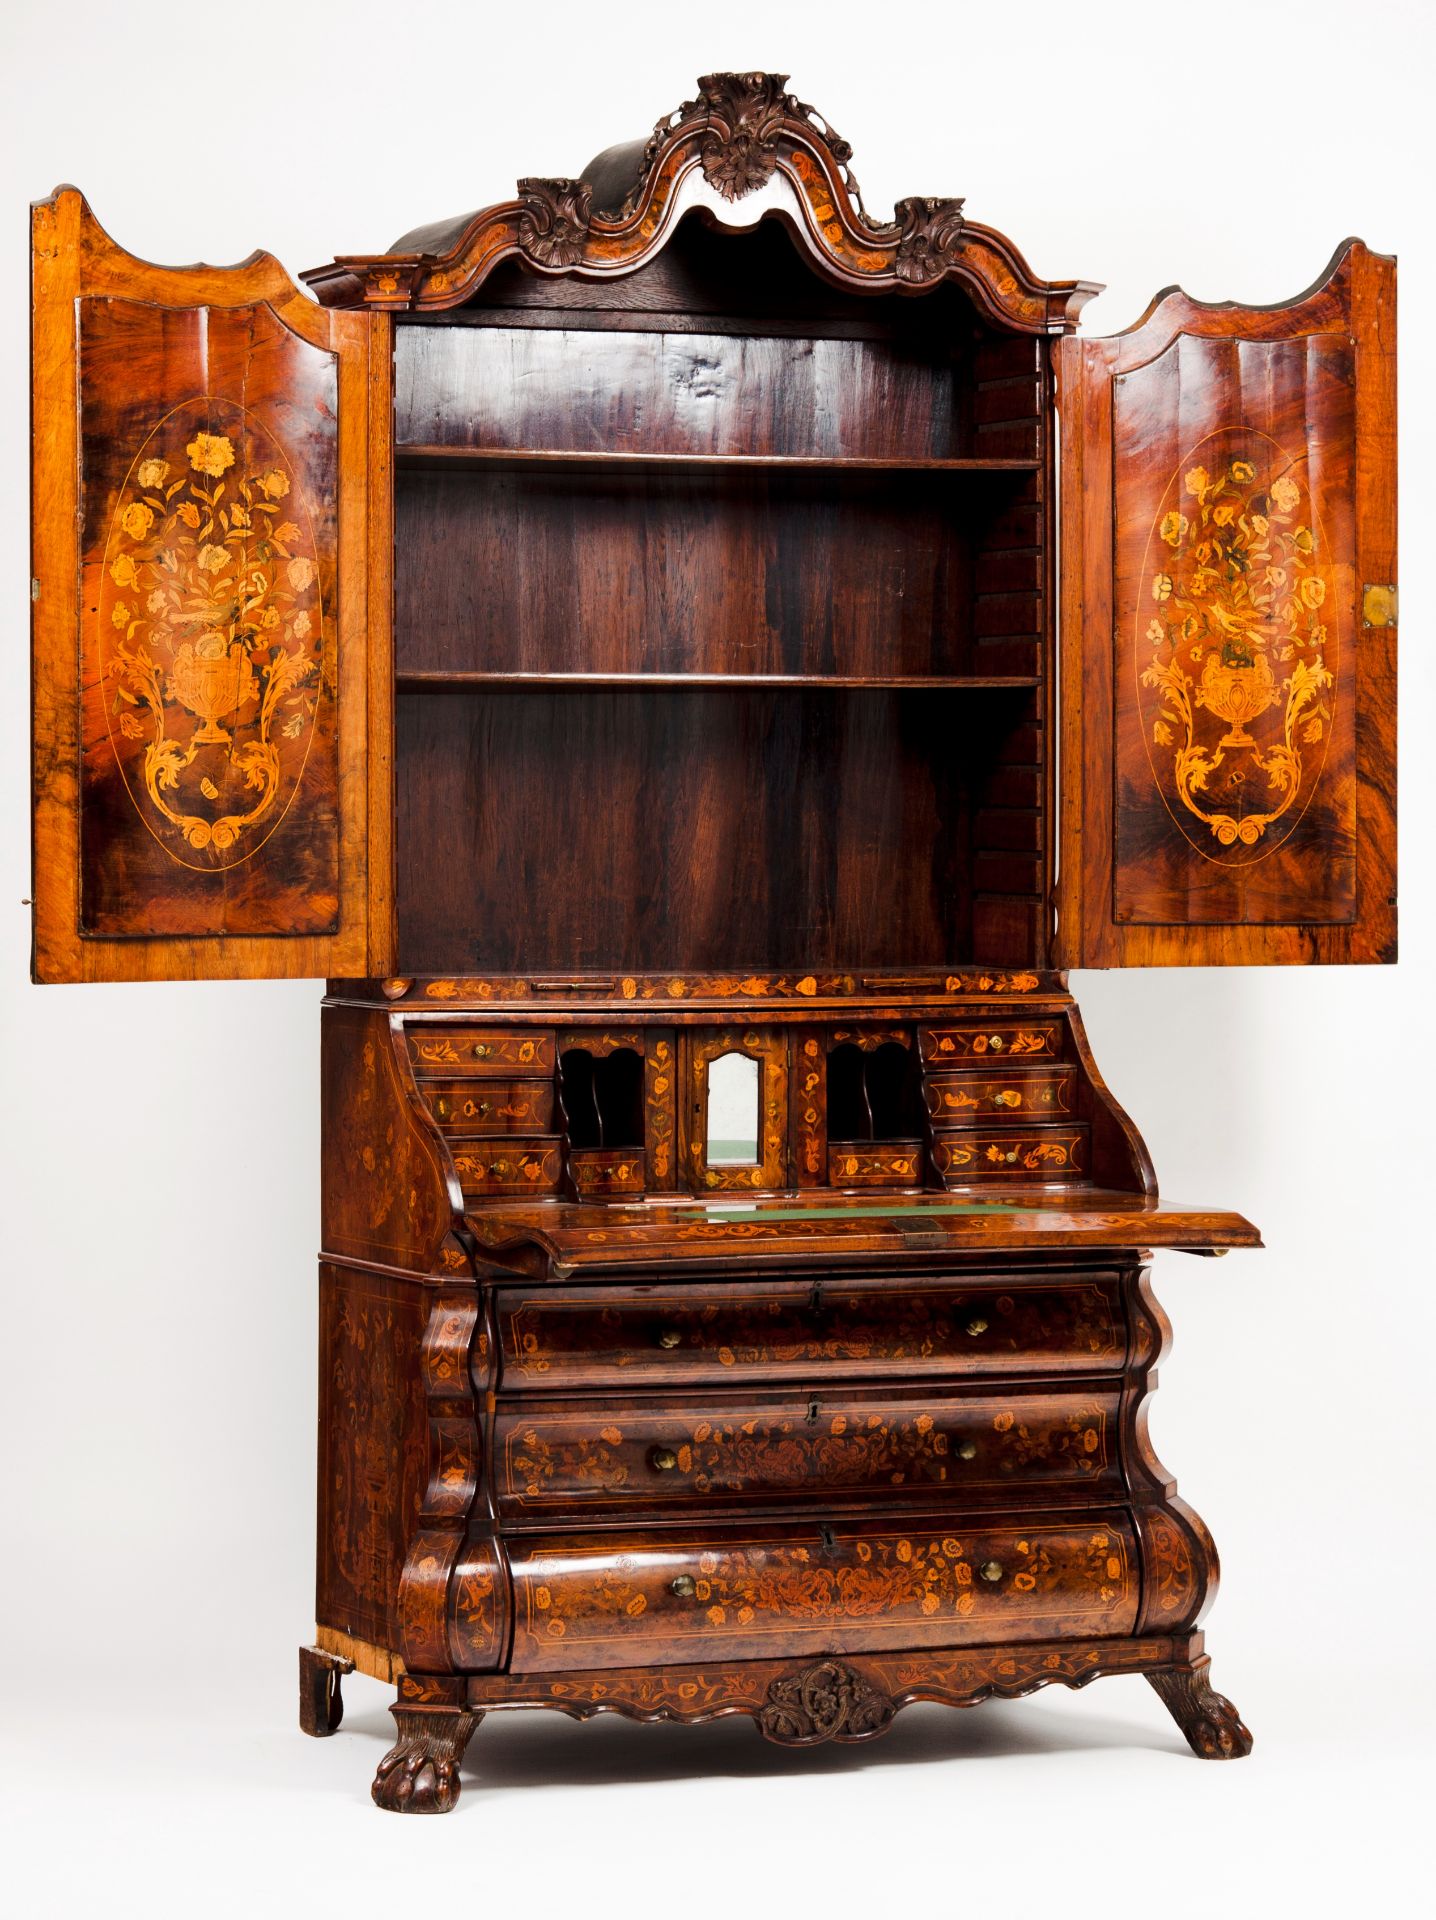 A Dutch marquetry bureau bookcaseWalnut and burr-walnut root veneered Richly decorated with - Image 2 of 2